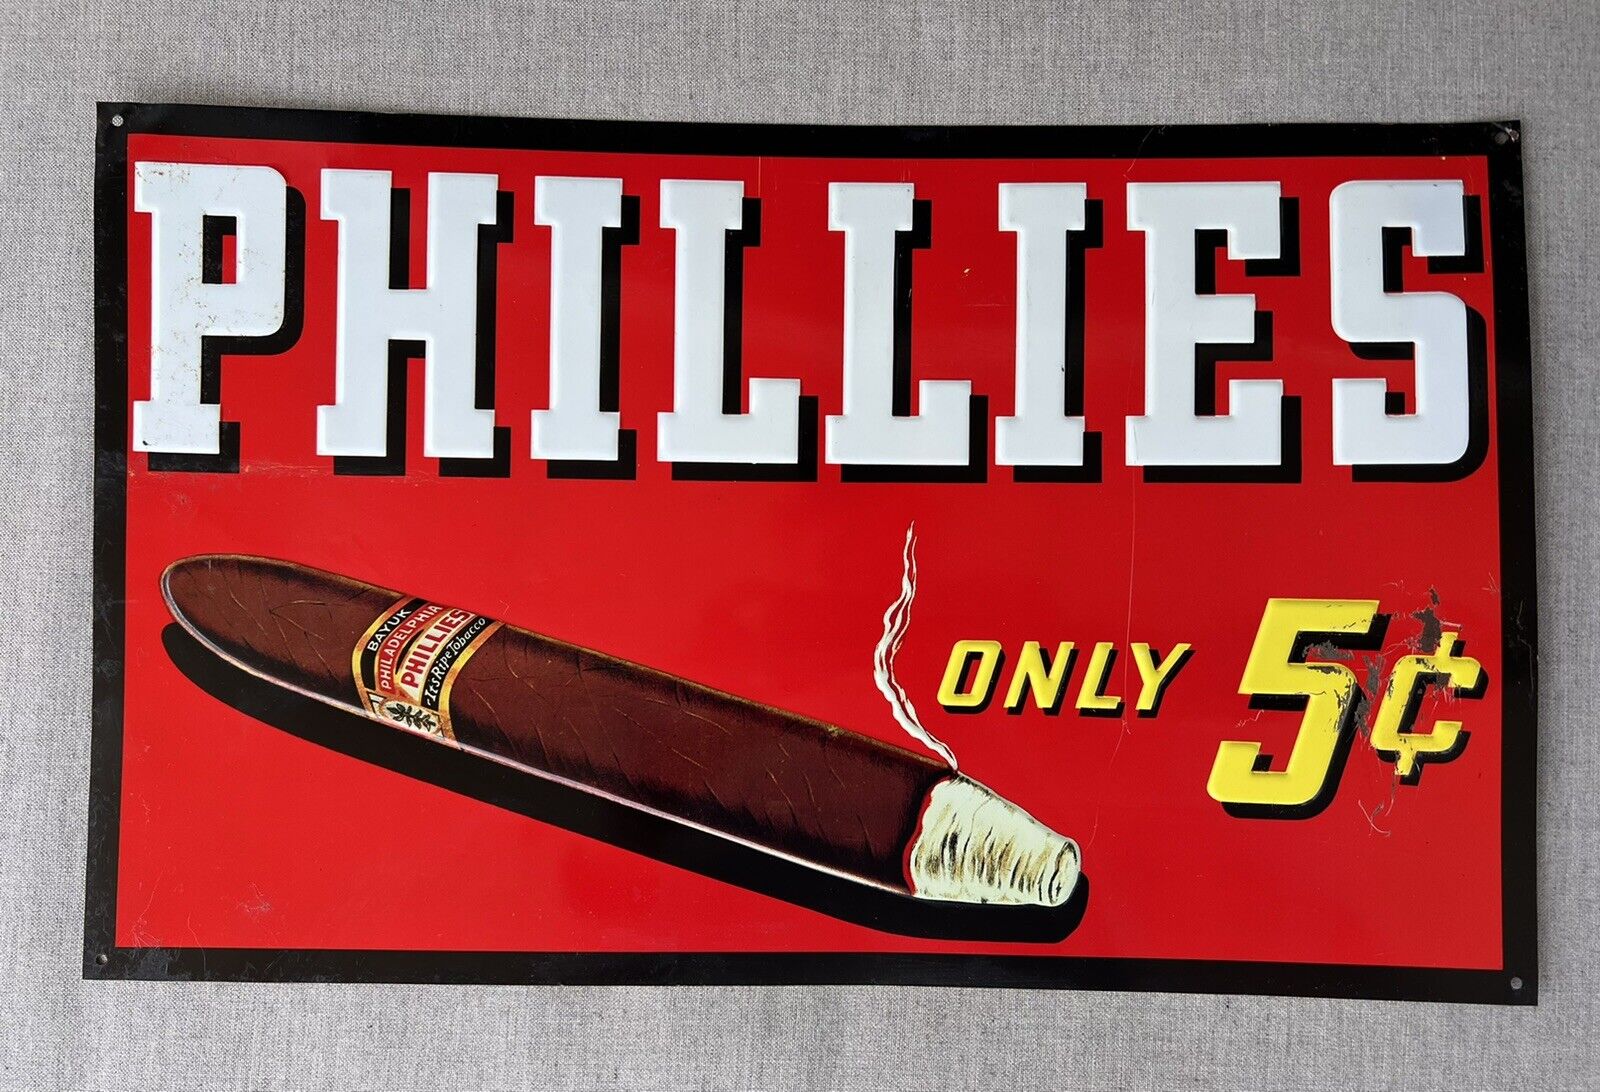 Vintage Phillies Cigar Embossed Sign Only 5c Bayuk Phillidephia Phillies Sign